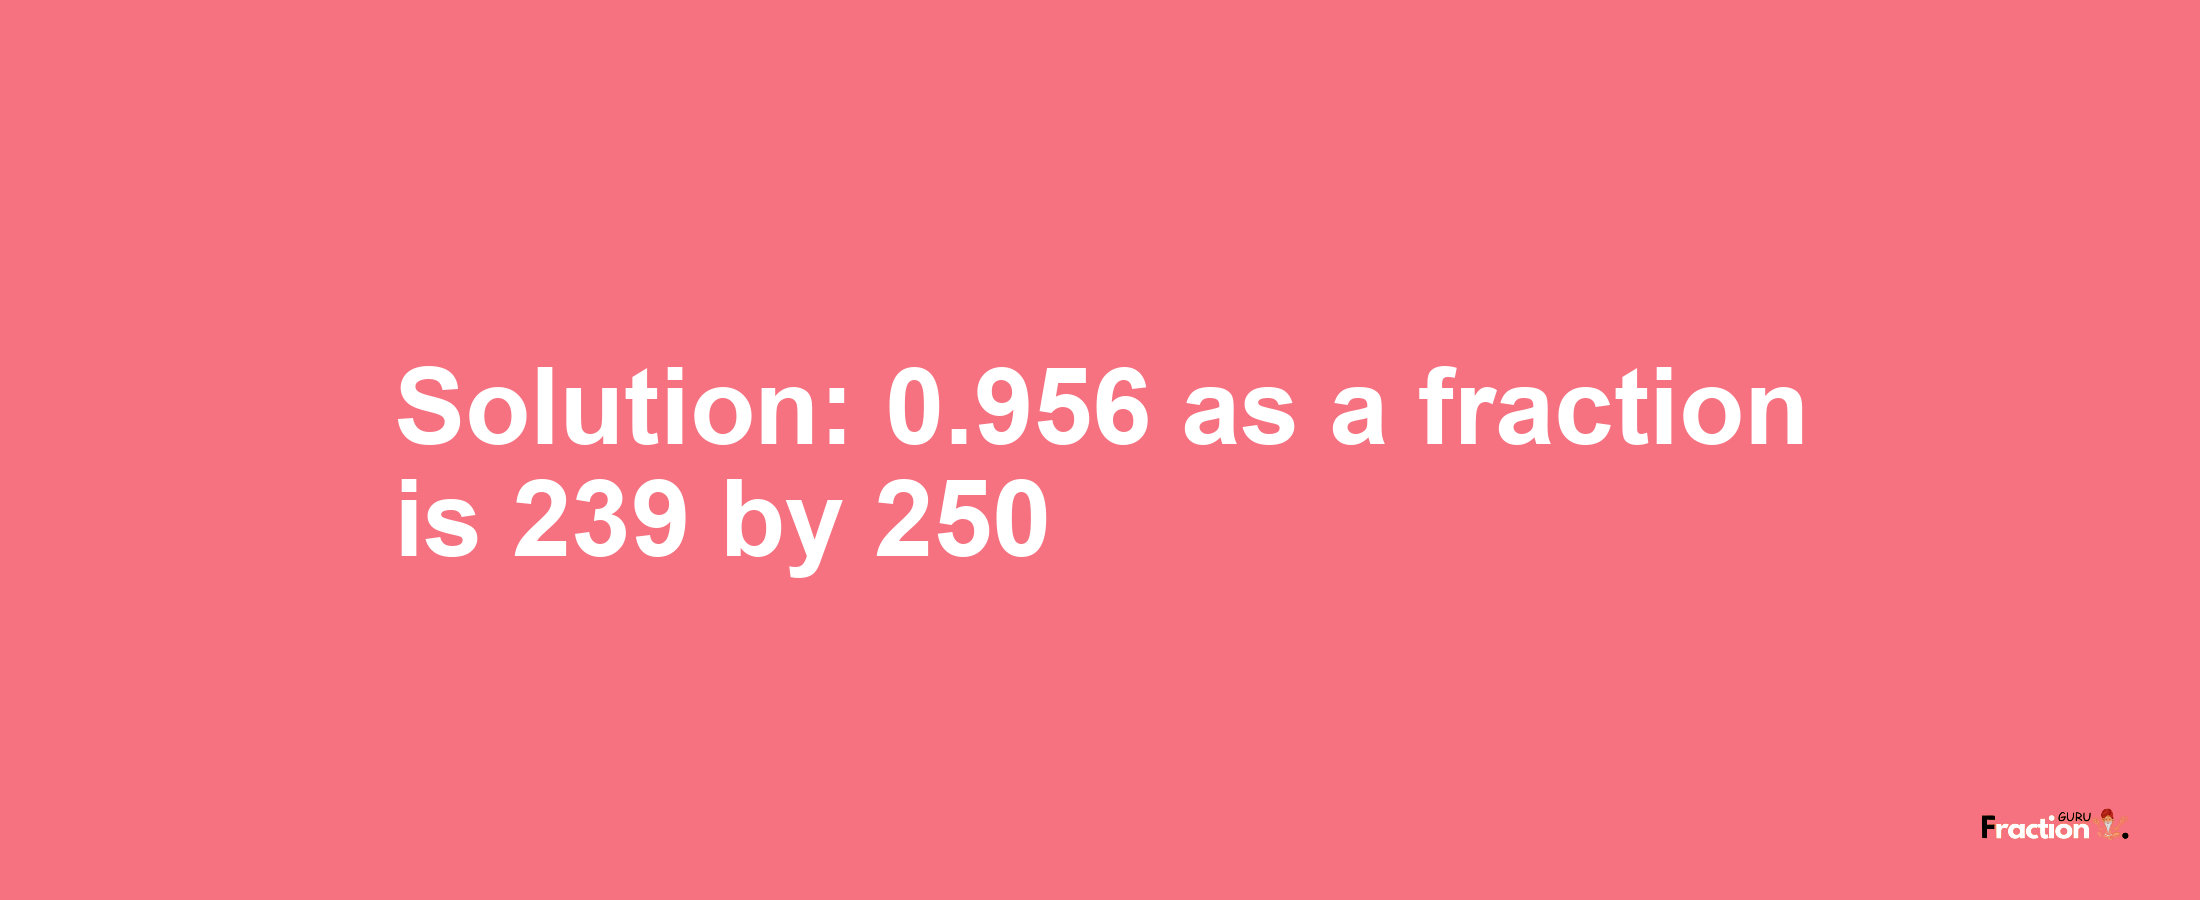 Solution:0.956 as a fraction is 239/250